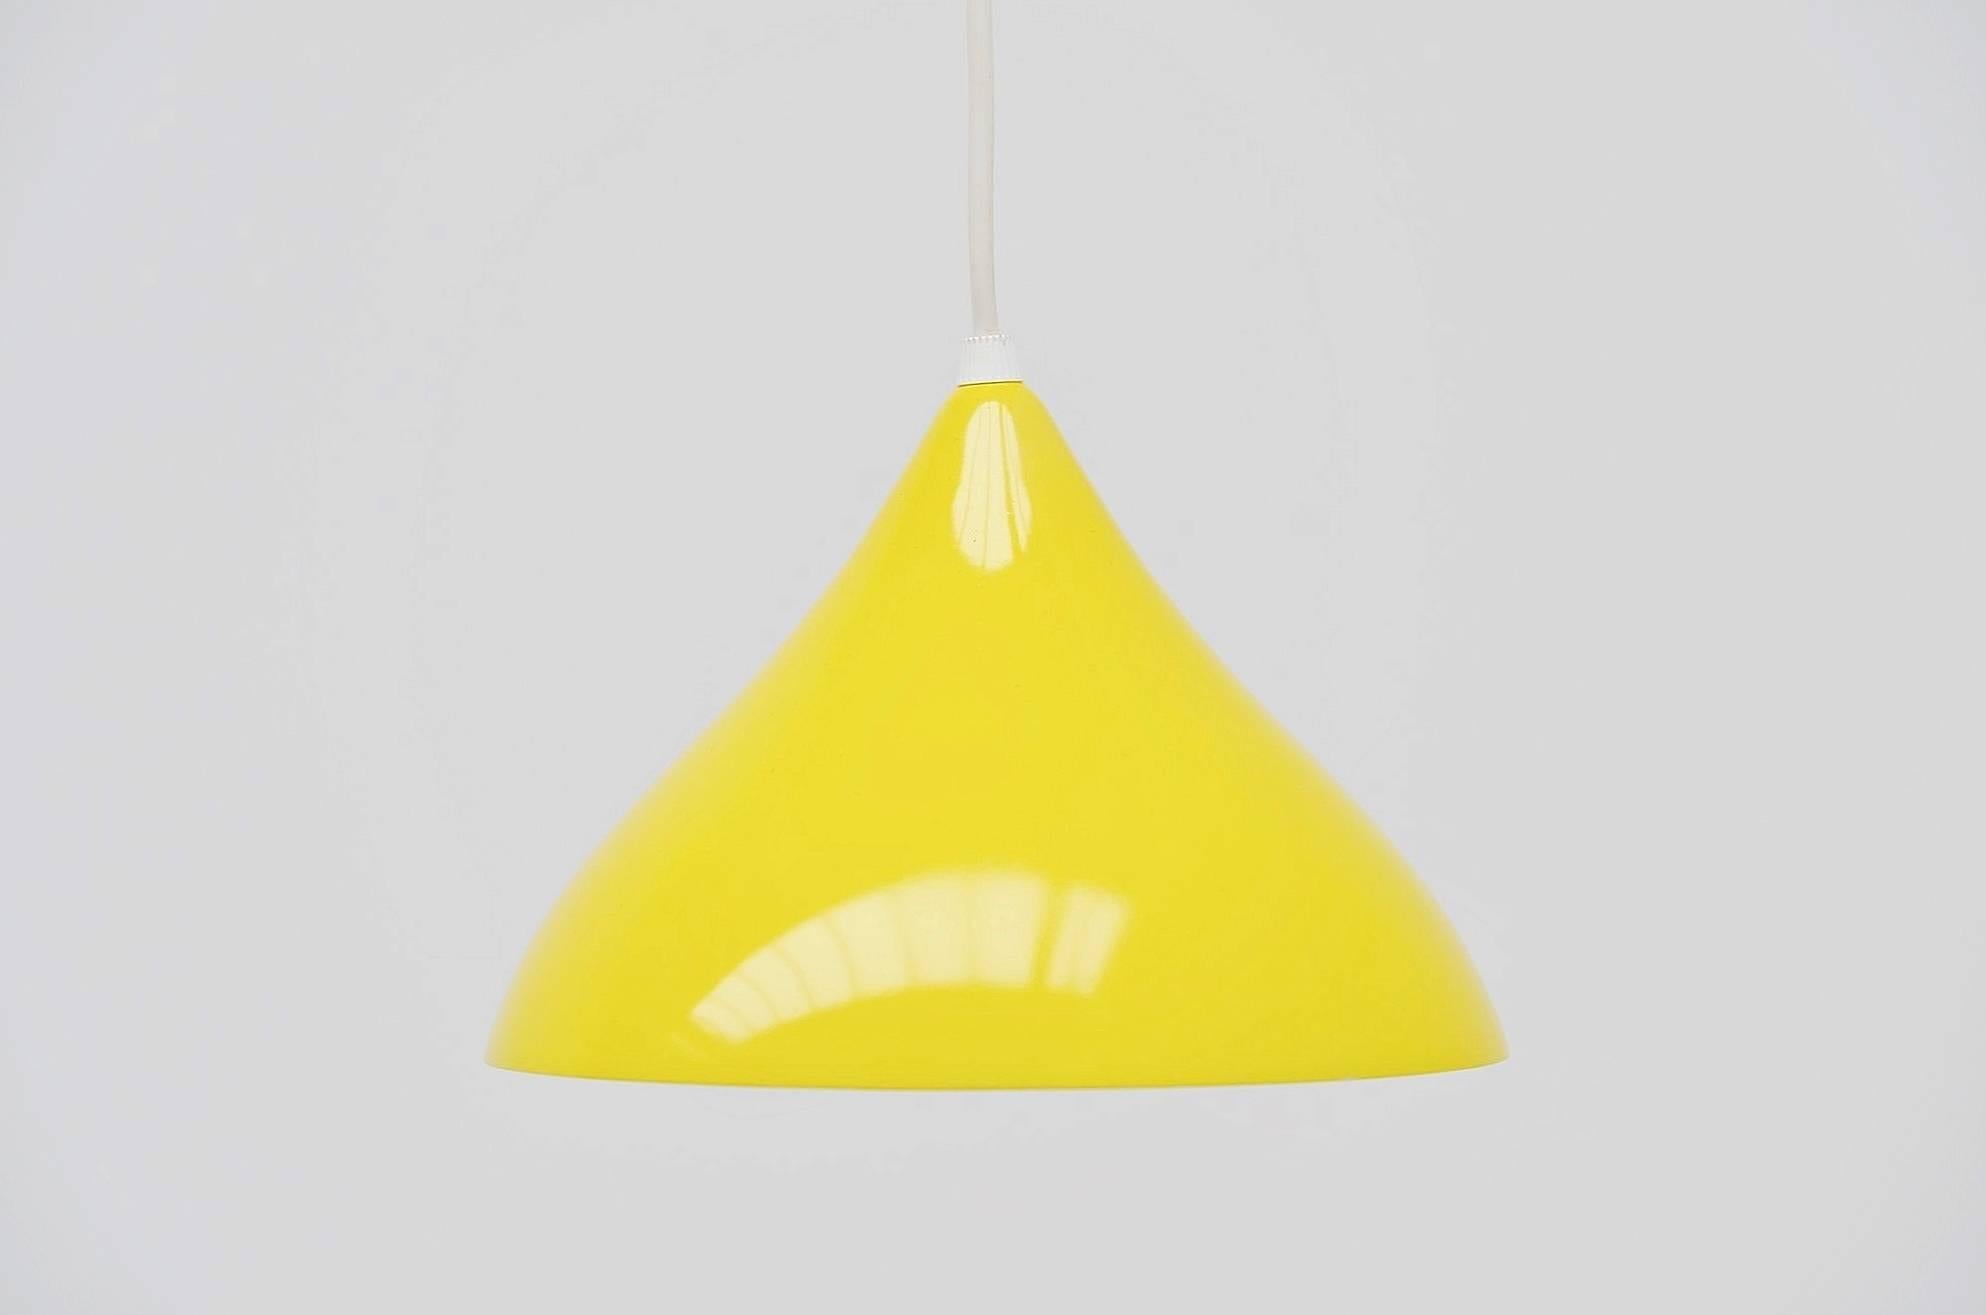 Very nice balance wall lamp by Cosack Leuchten, Germany, 1960. This is a very nice and ingenious wall lamp made and designed by Cosack. The lamp has a wall arm with several hooks, yellow lacquered, so the shade can be hung in different positions, or